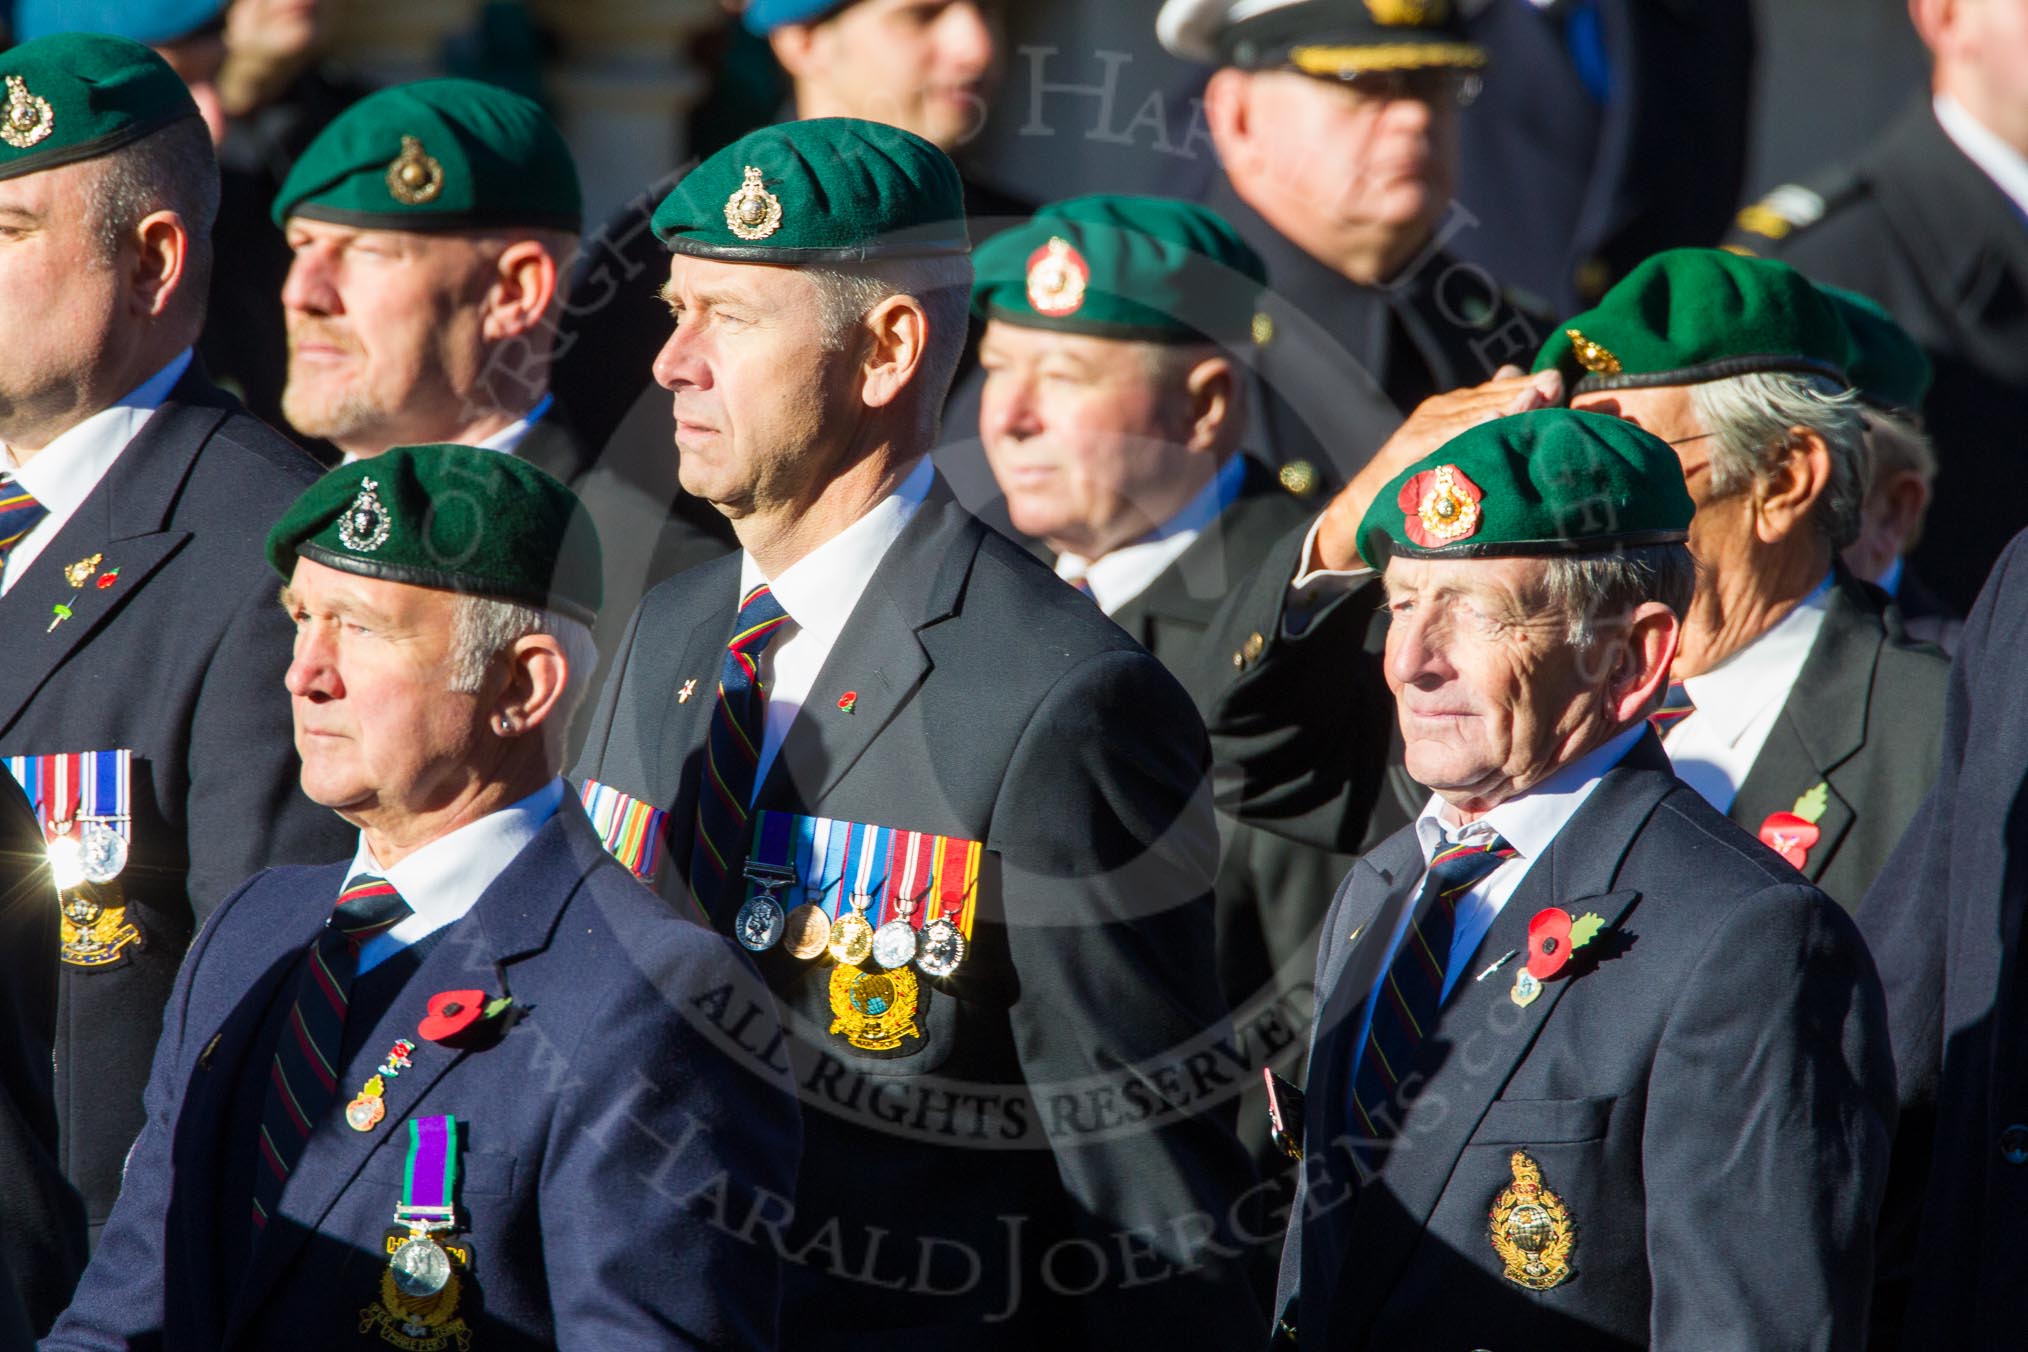 Remembrance Sunday Cenotaph March Past 2013: E3 - Royal Marines Association..
Press stand opposite the Foreign Office building, Whitehall, London SW1,
London,
Greater London,
United Kingdom,
on 10 November 2013 at 11:44, image #386